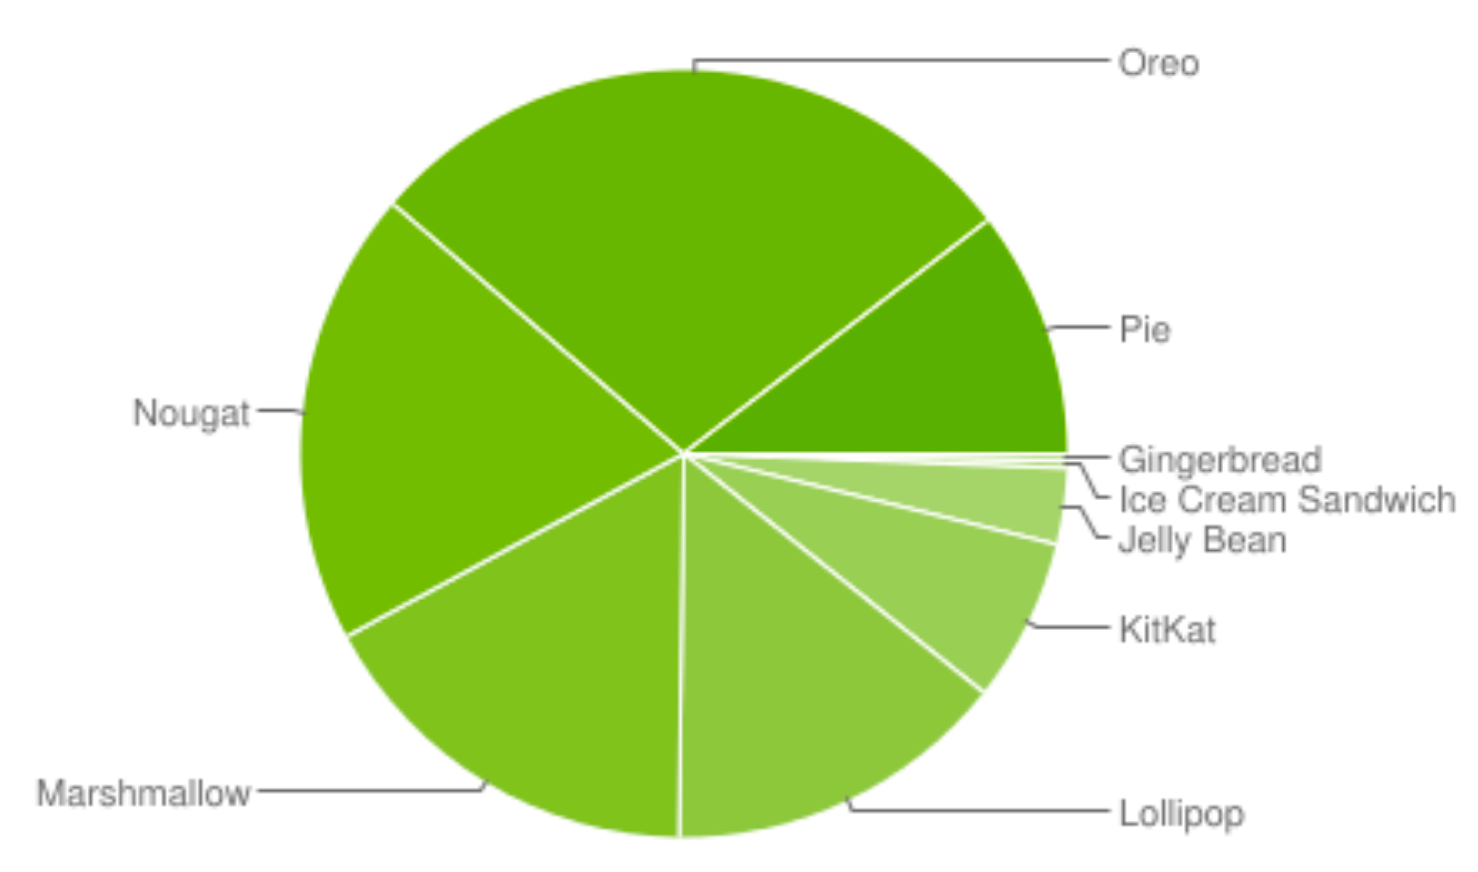 Usage data from Play store